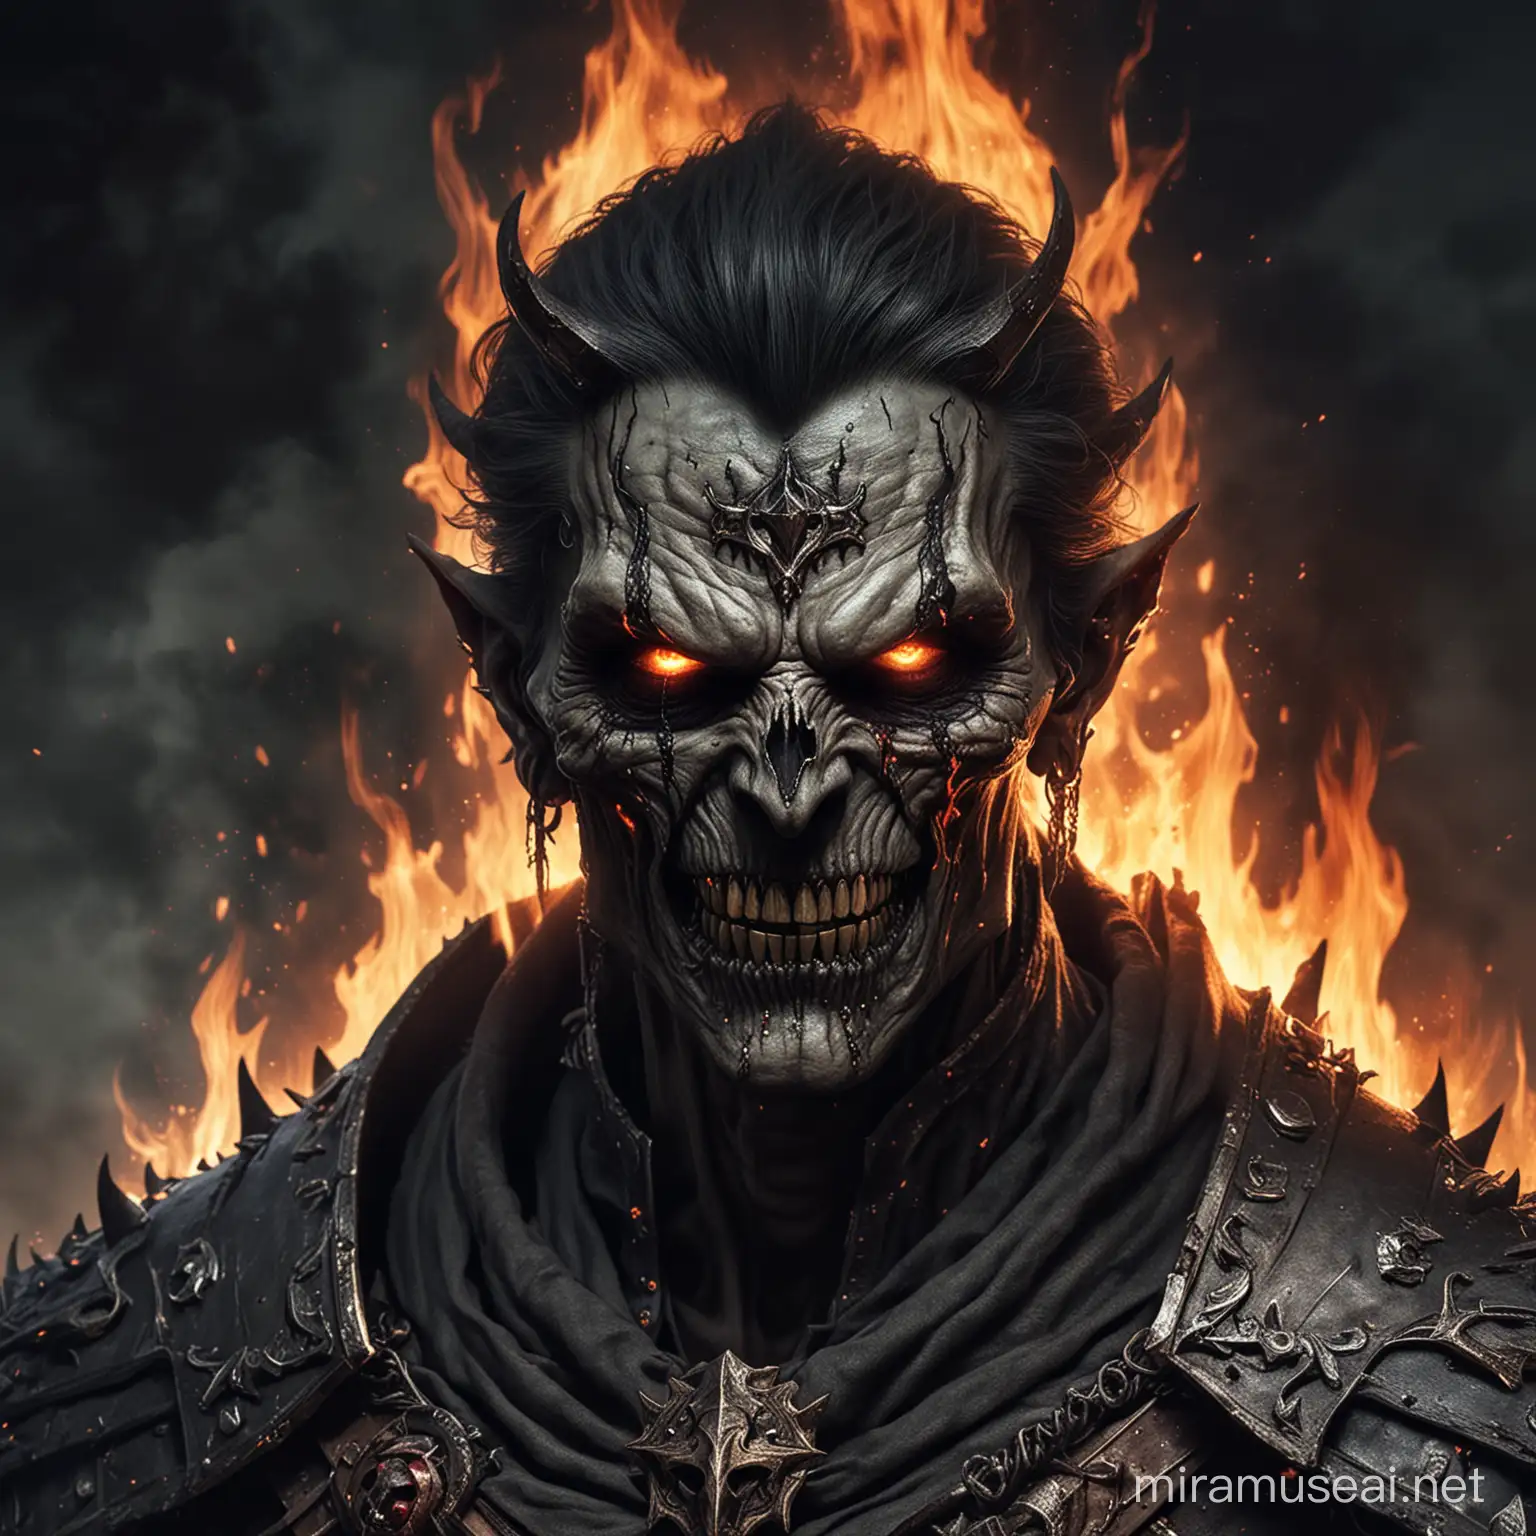 Once a noble ruler, he was corrupted by demon, and transformed into a powerful undead warlord. His appearance is as terrifying as his backstory. His once-proud visage is now a skeletal grin, his eyes burning with an unholy fire